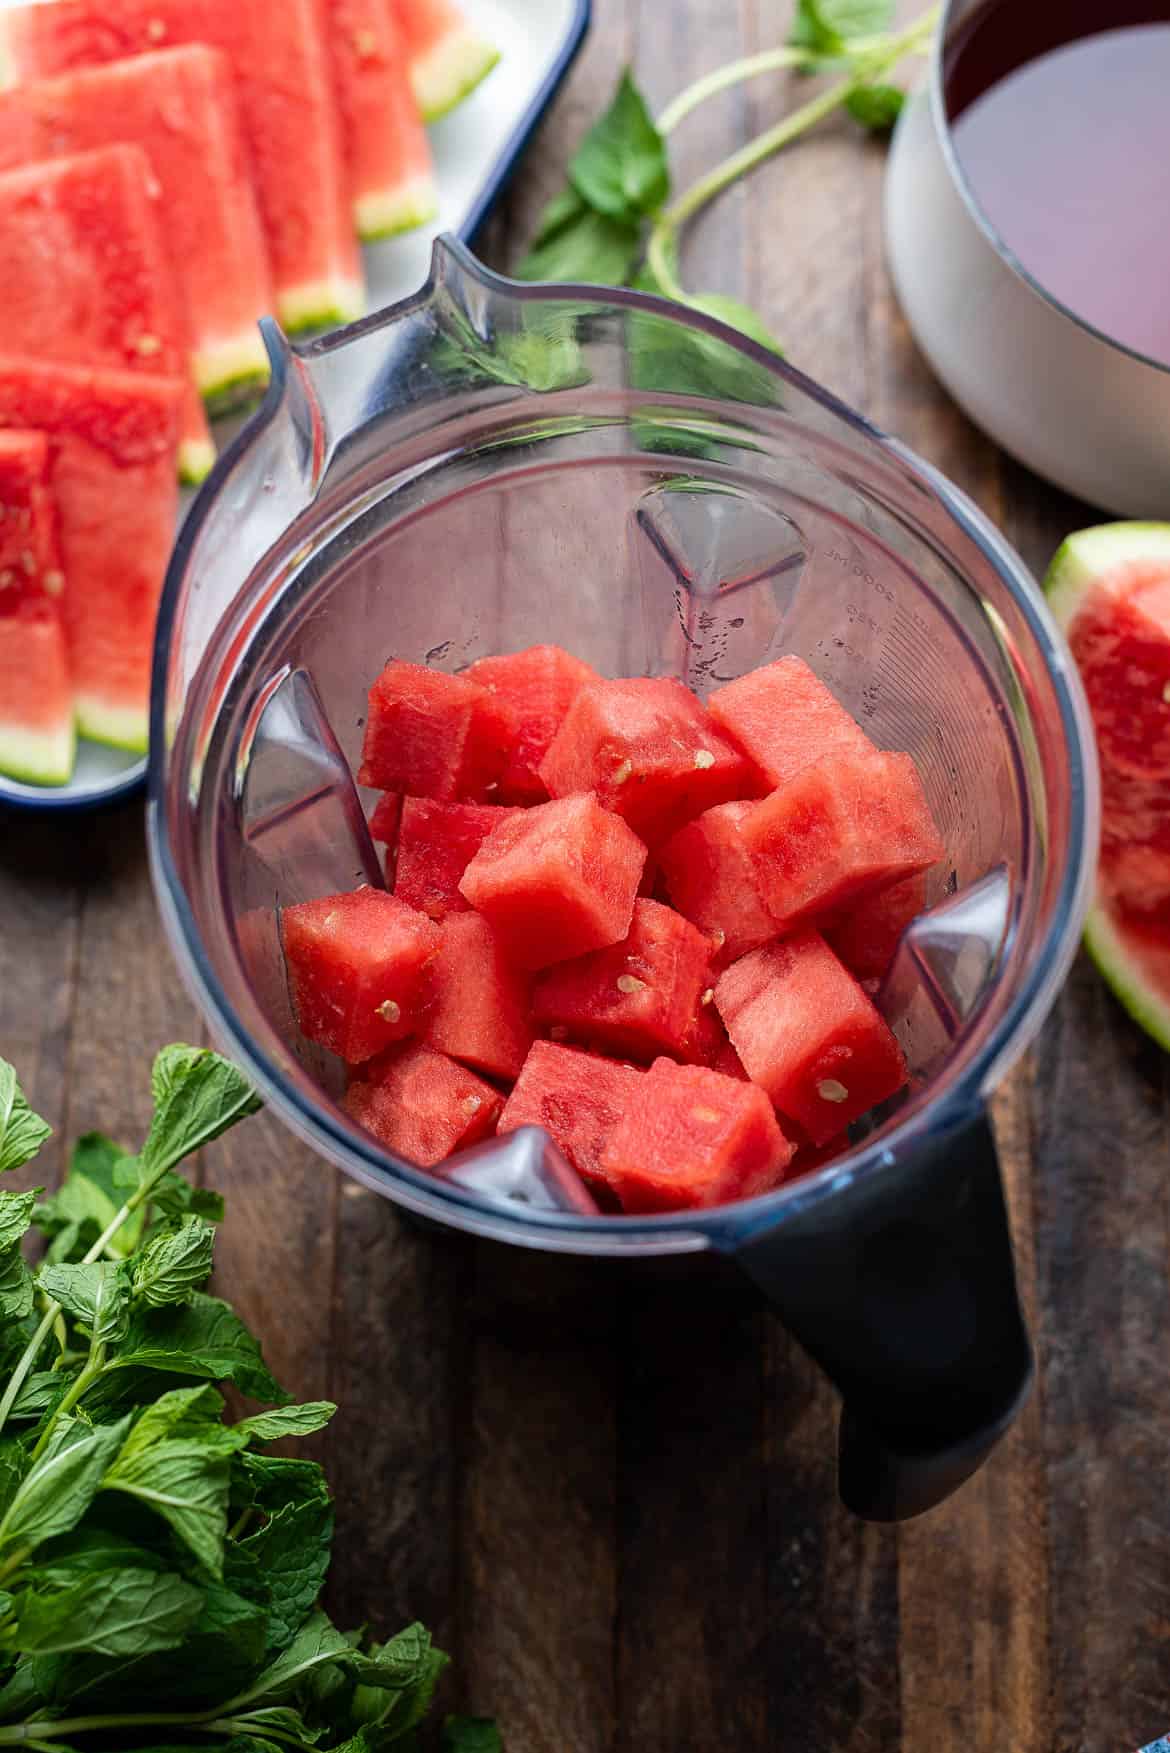 Chunks of watermelon in a blender.